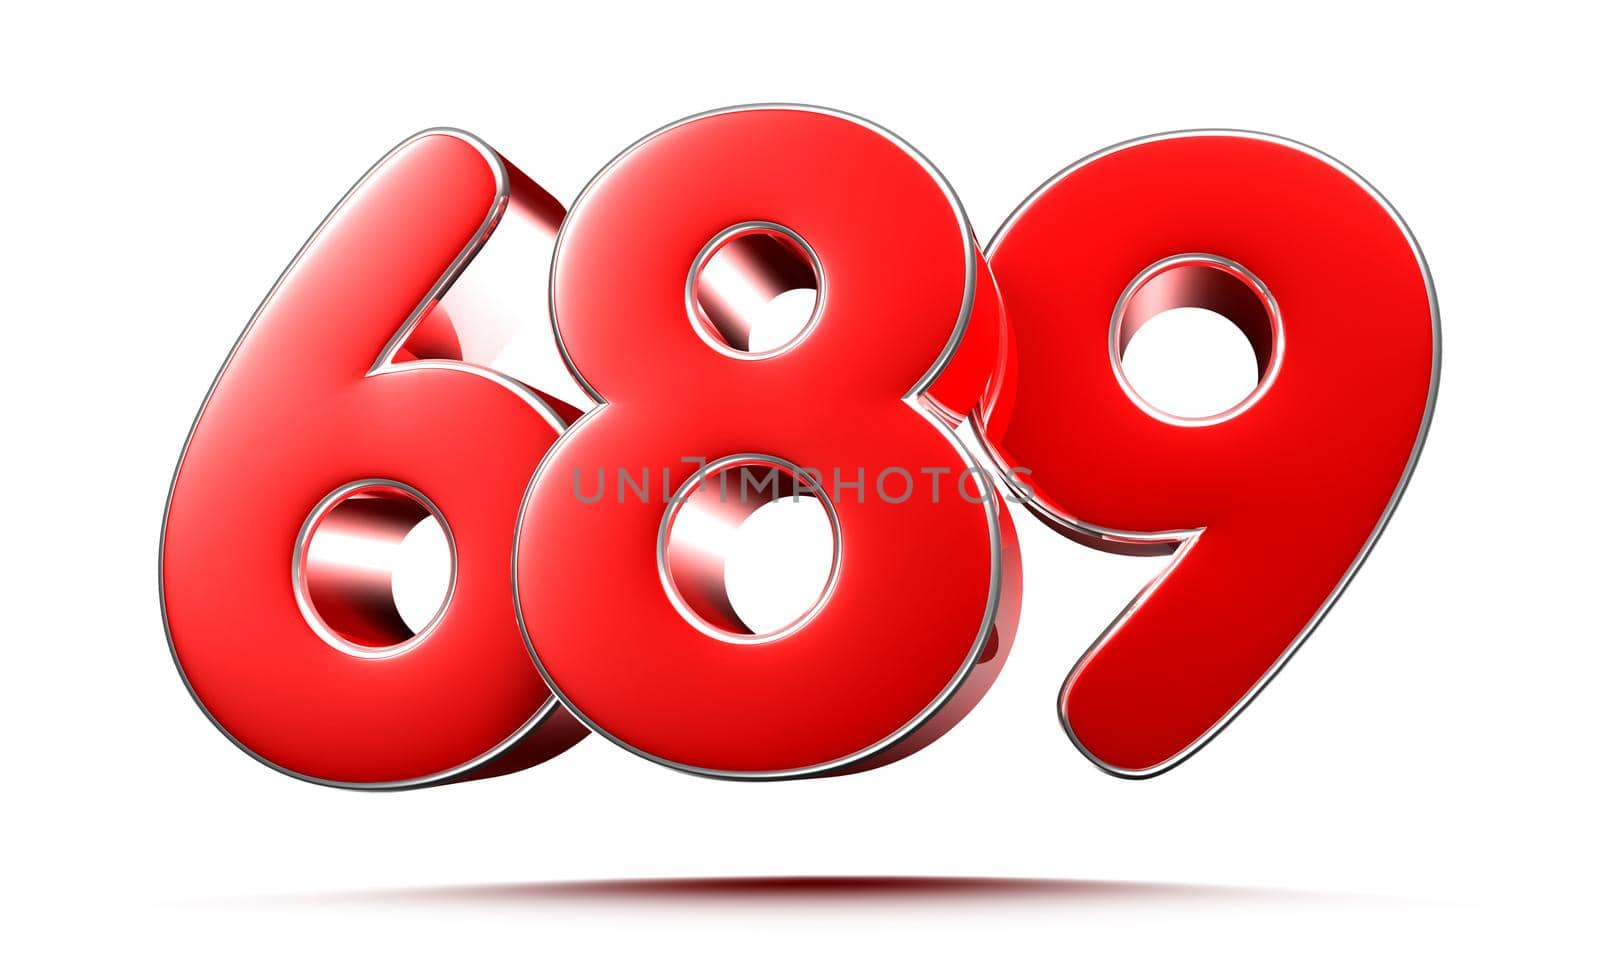 Rounded red numbers 689 on white background 3D illustration with clipping path by thitimontoyai